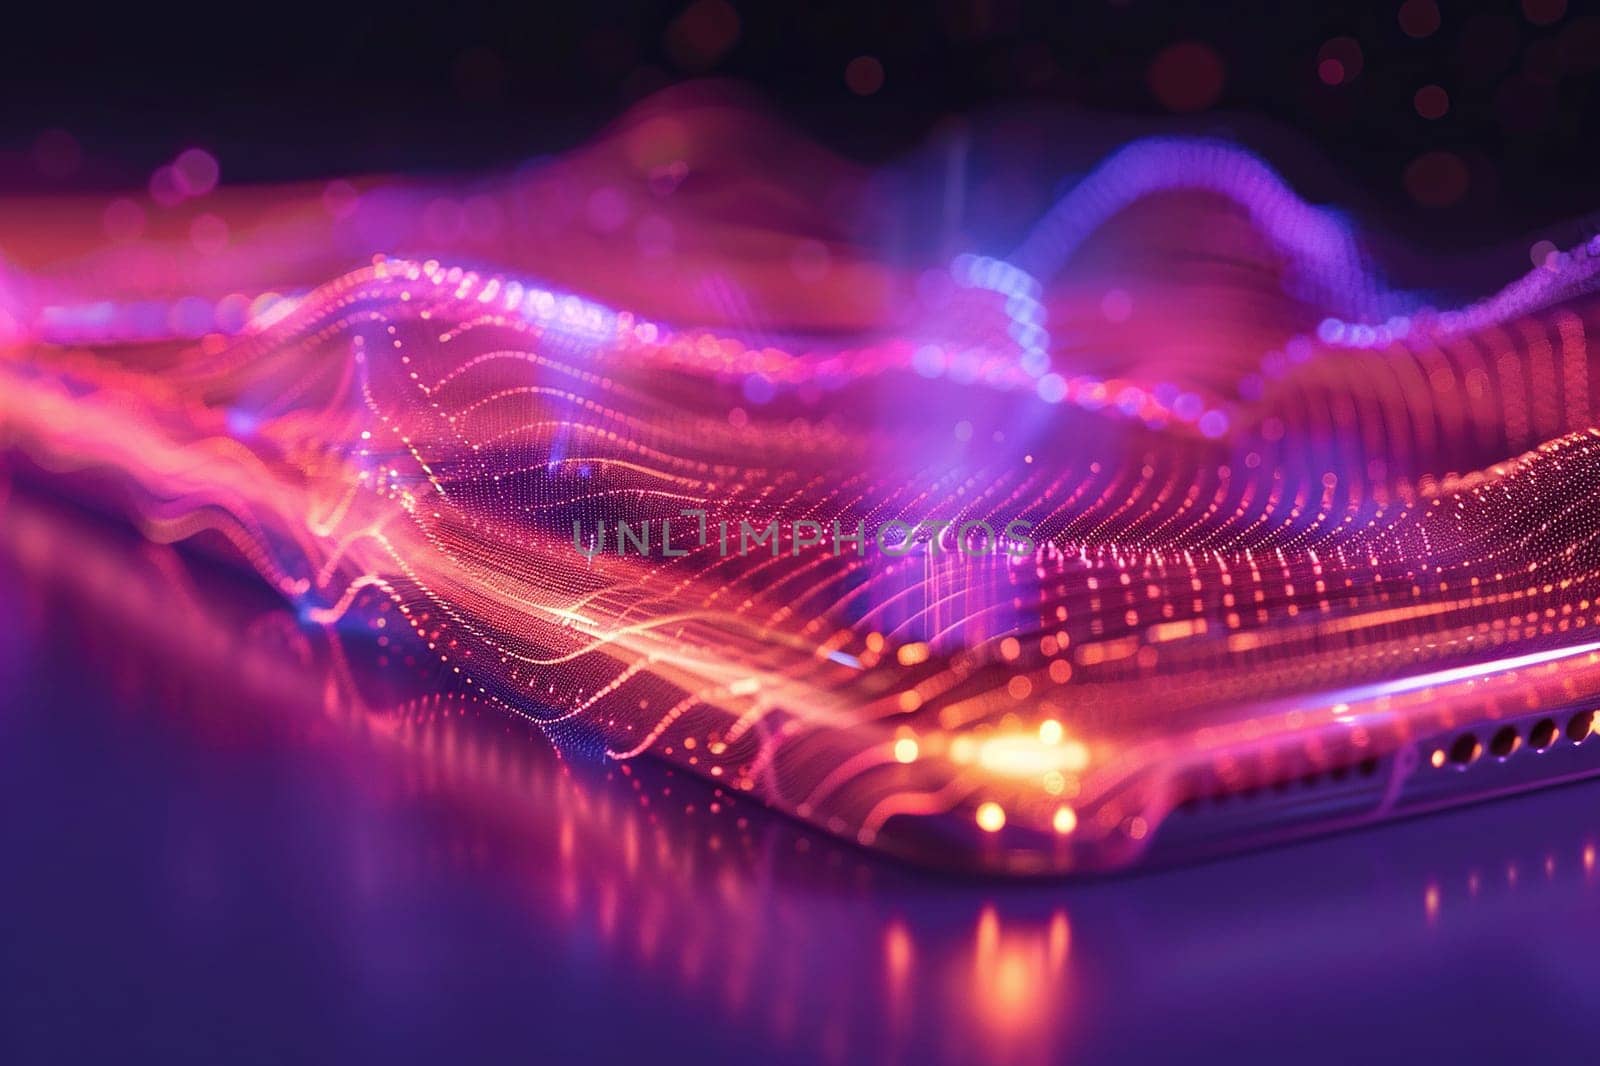 Close-up of a smartphone emitting electromagnetic waves. Smartphone screen with neon glow.